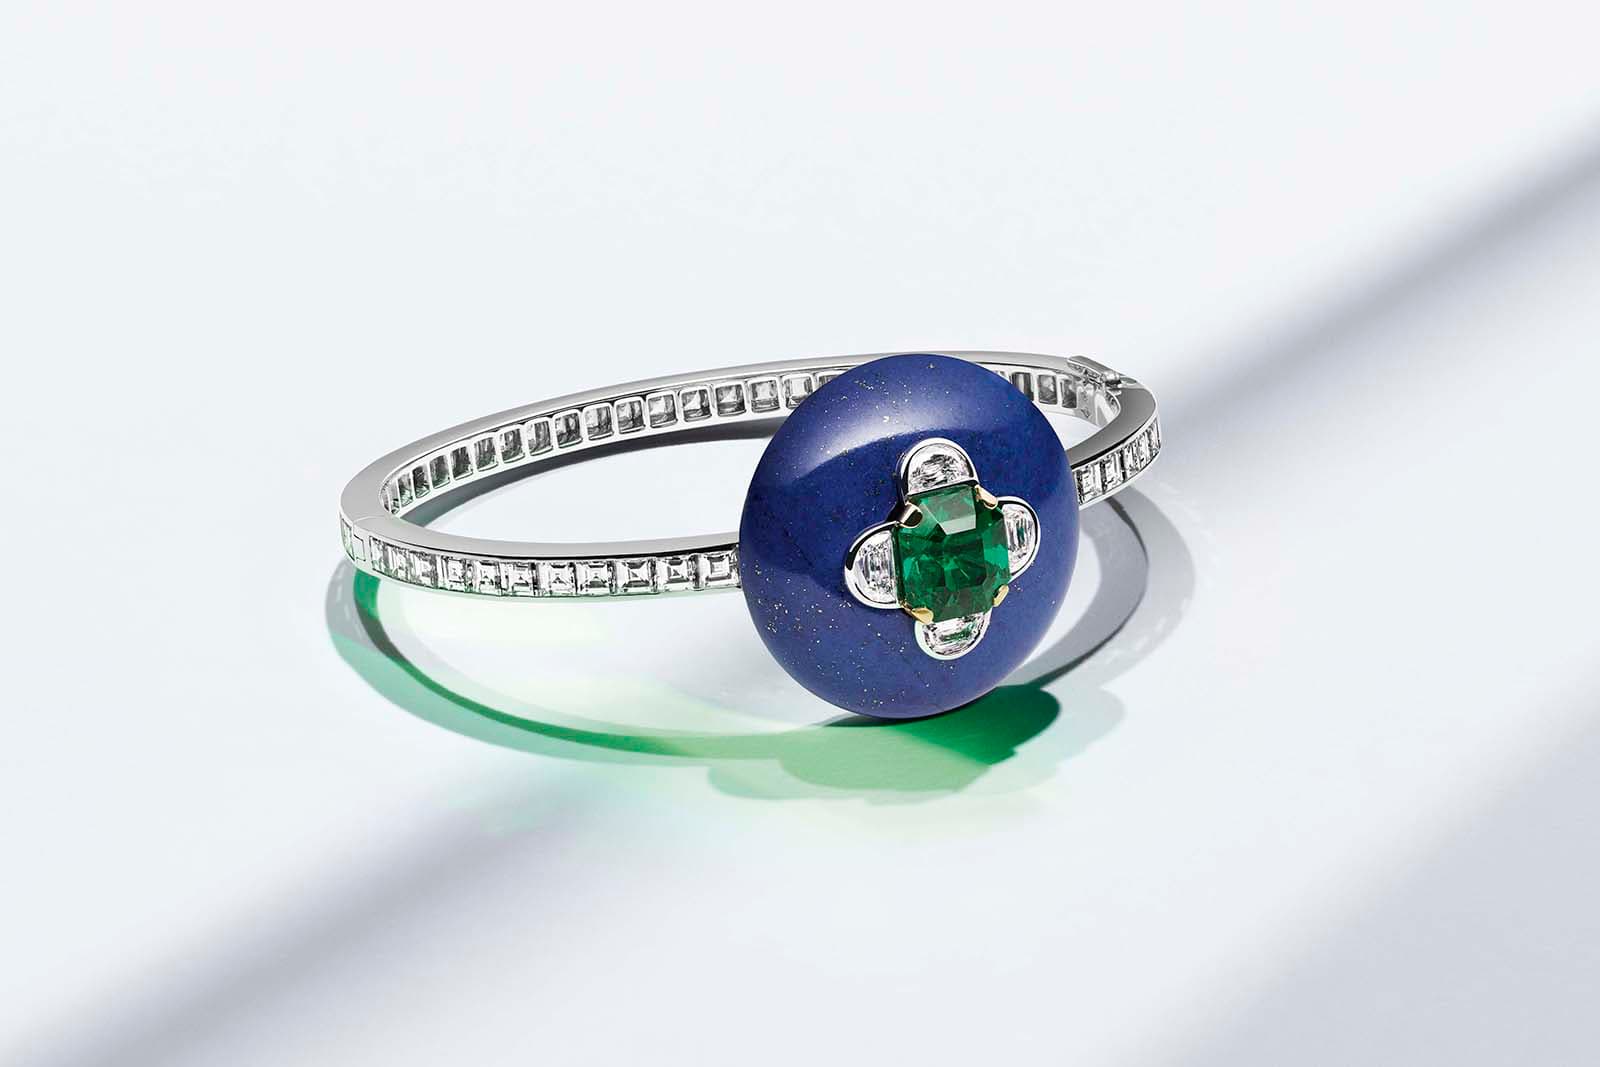 Louis Vuitton 'Riders of the Knights' collection bracelet with emerald, lapis lazuli and diamonds in white gold